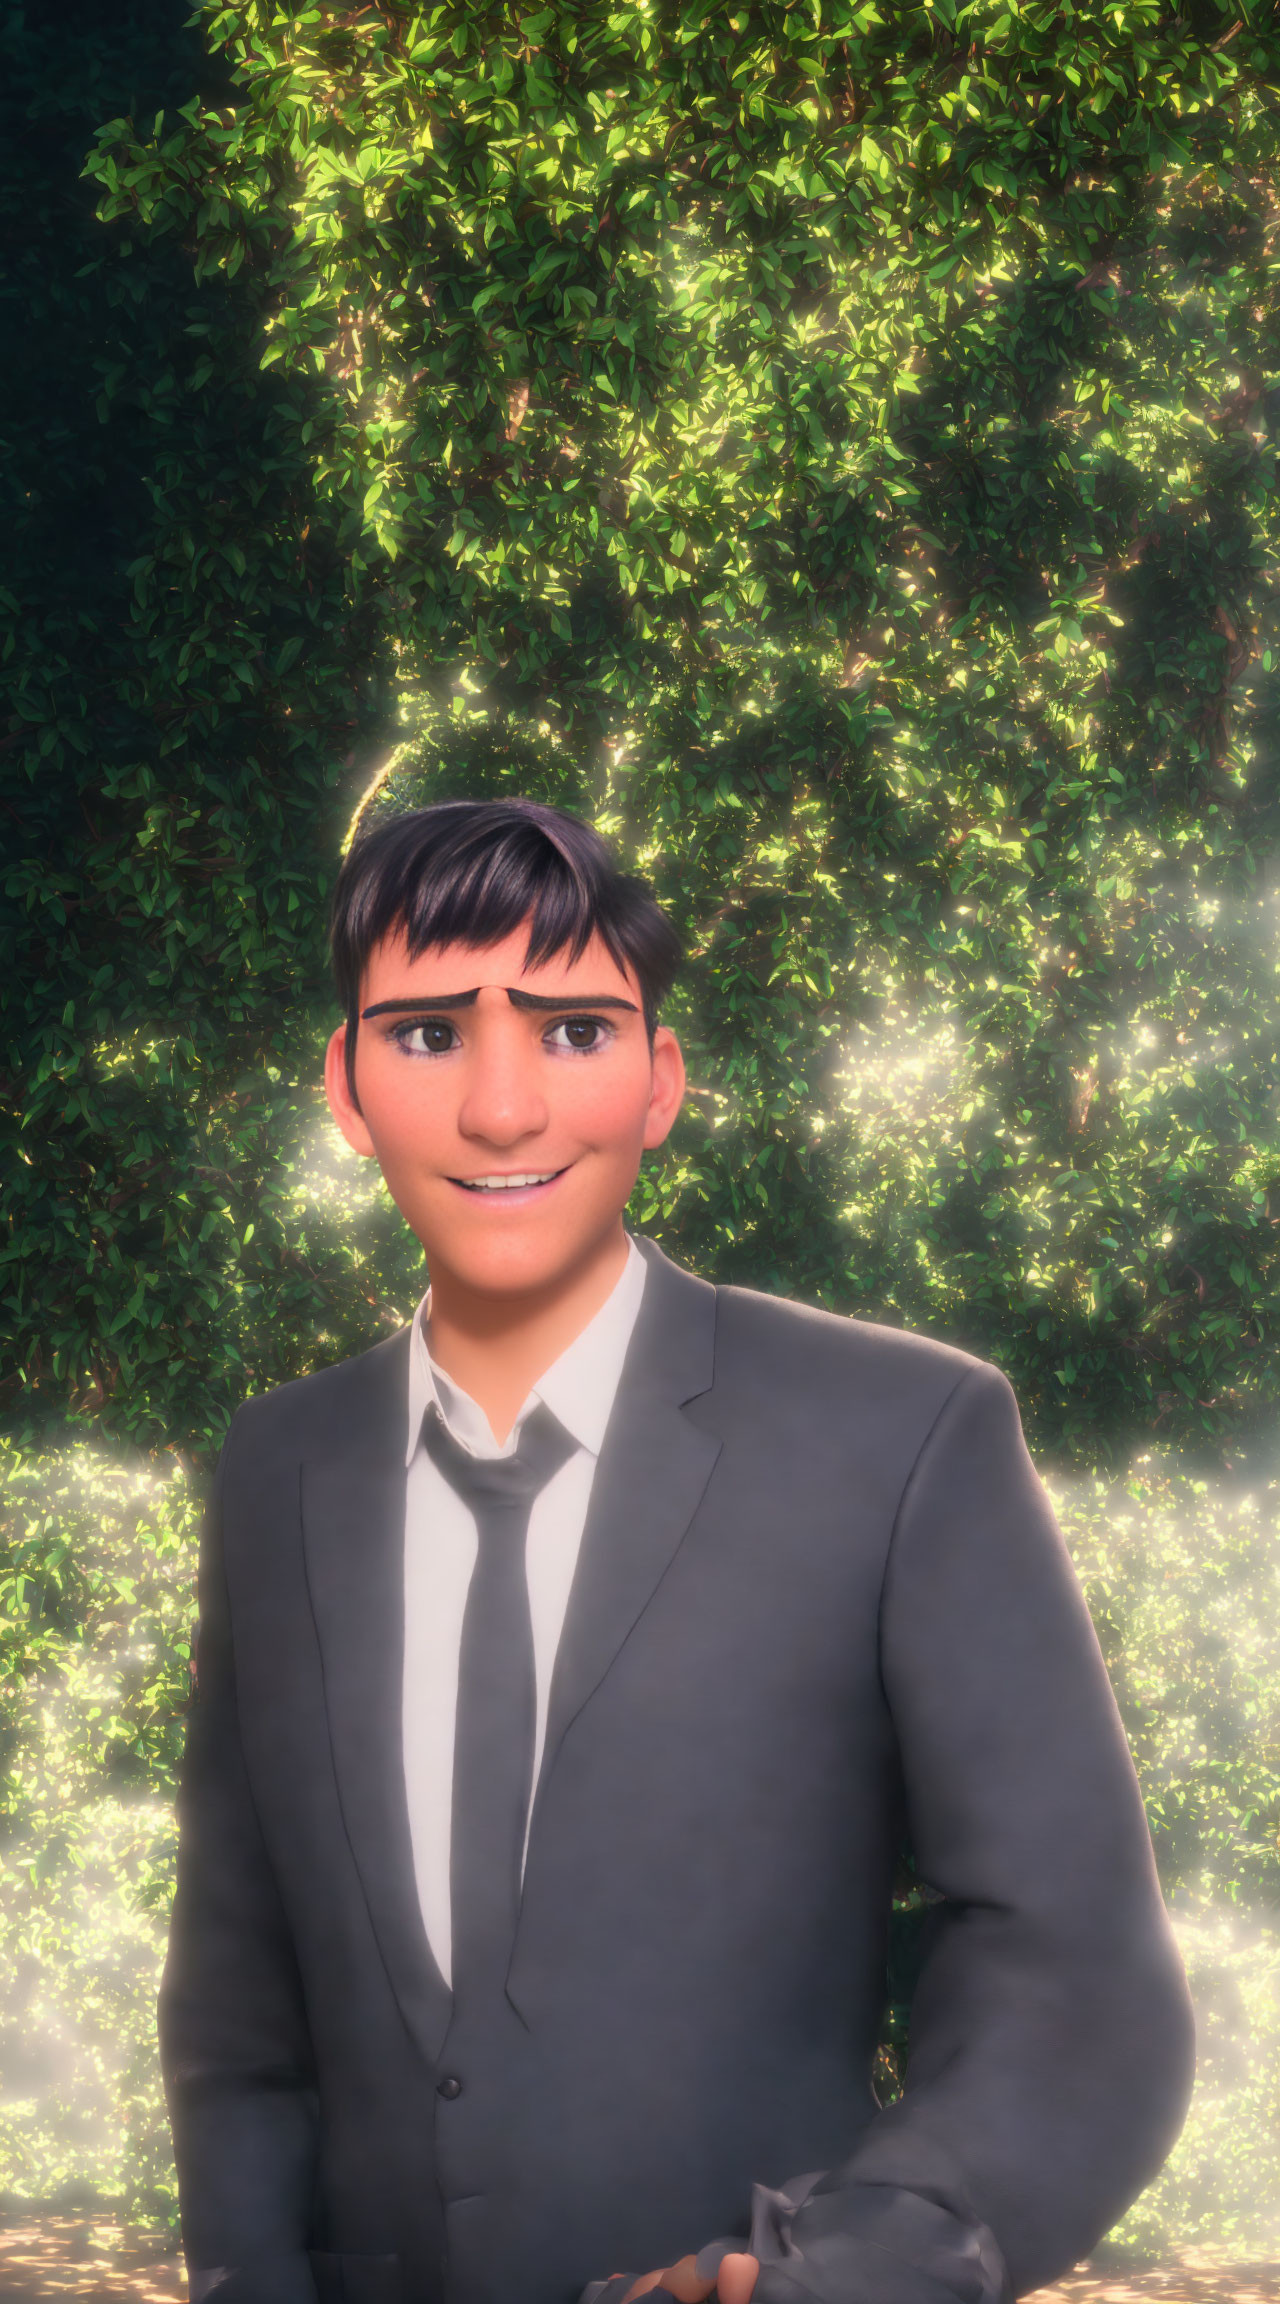 Smiling male character in suit with sunlight and green foliage.